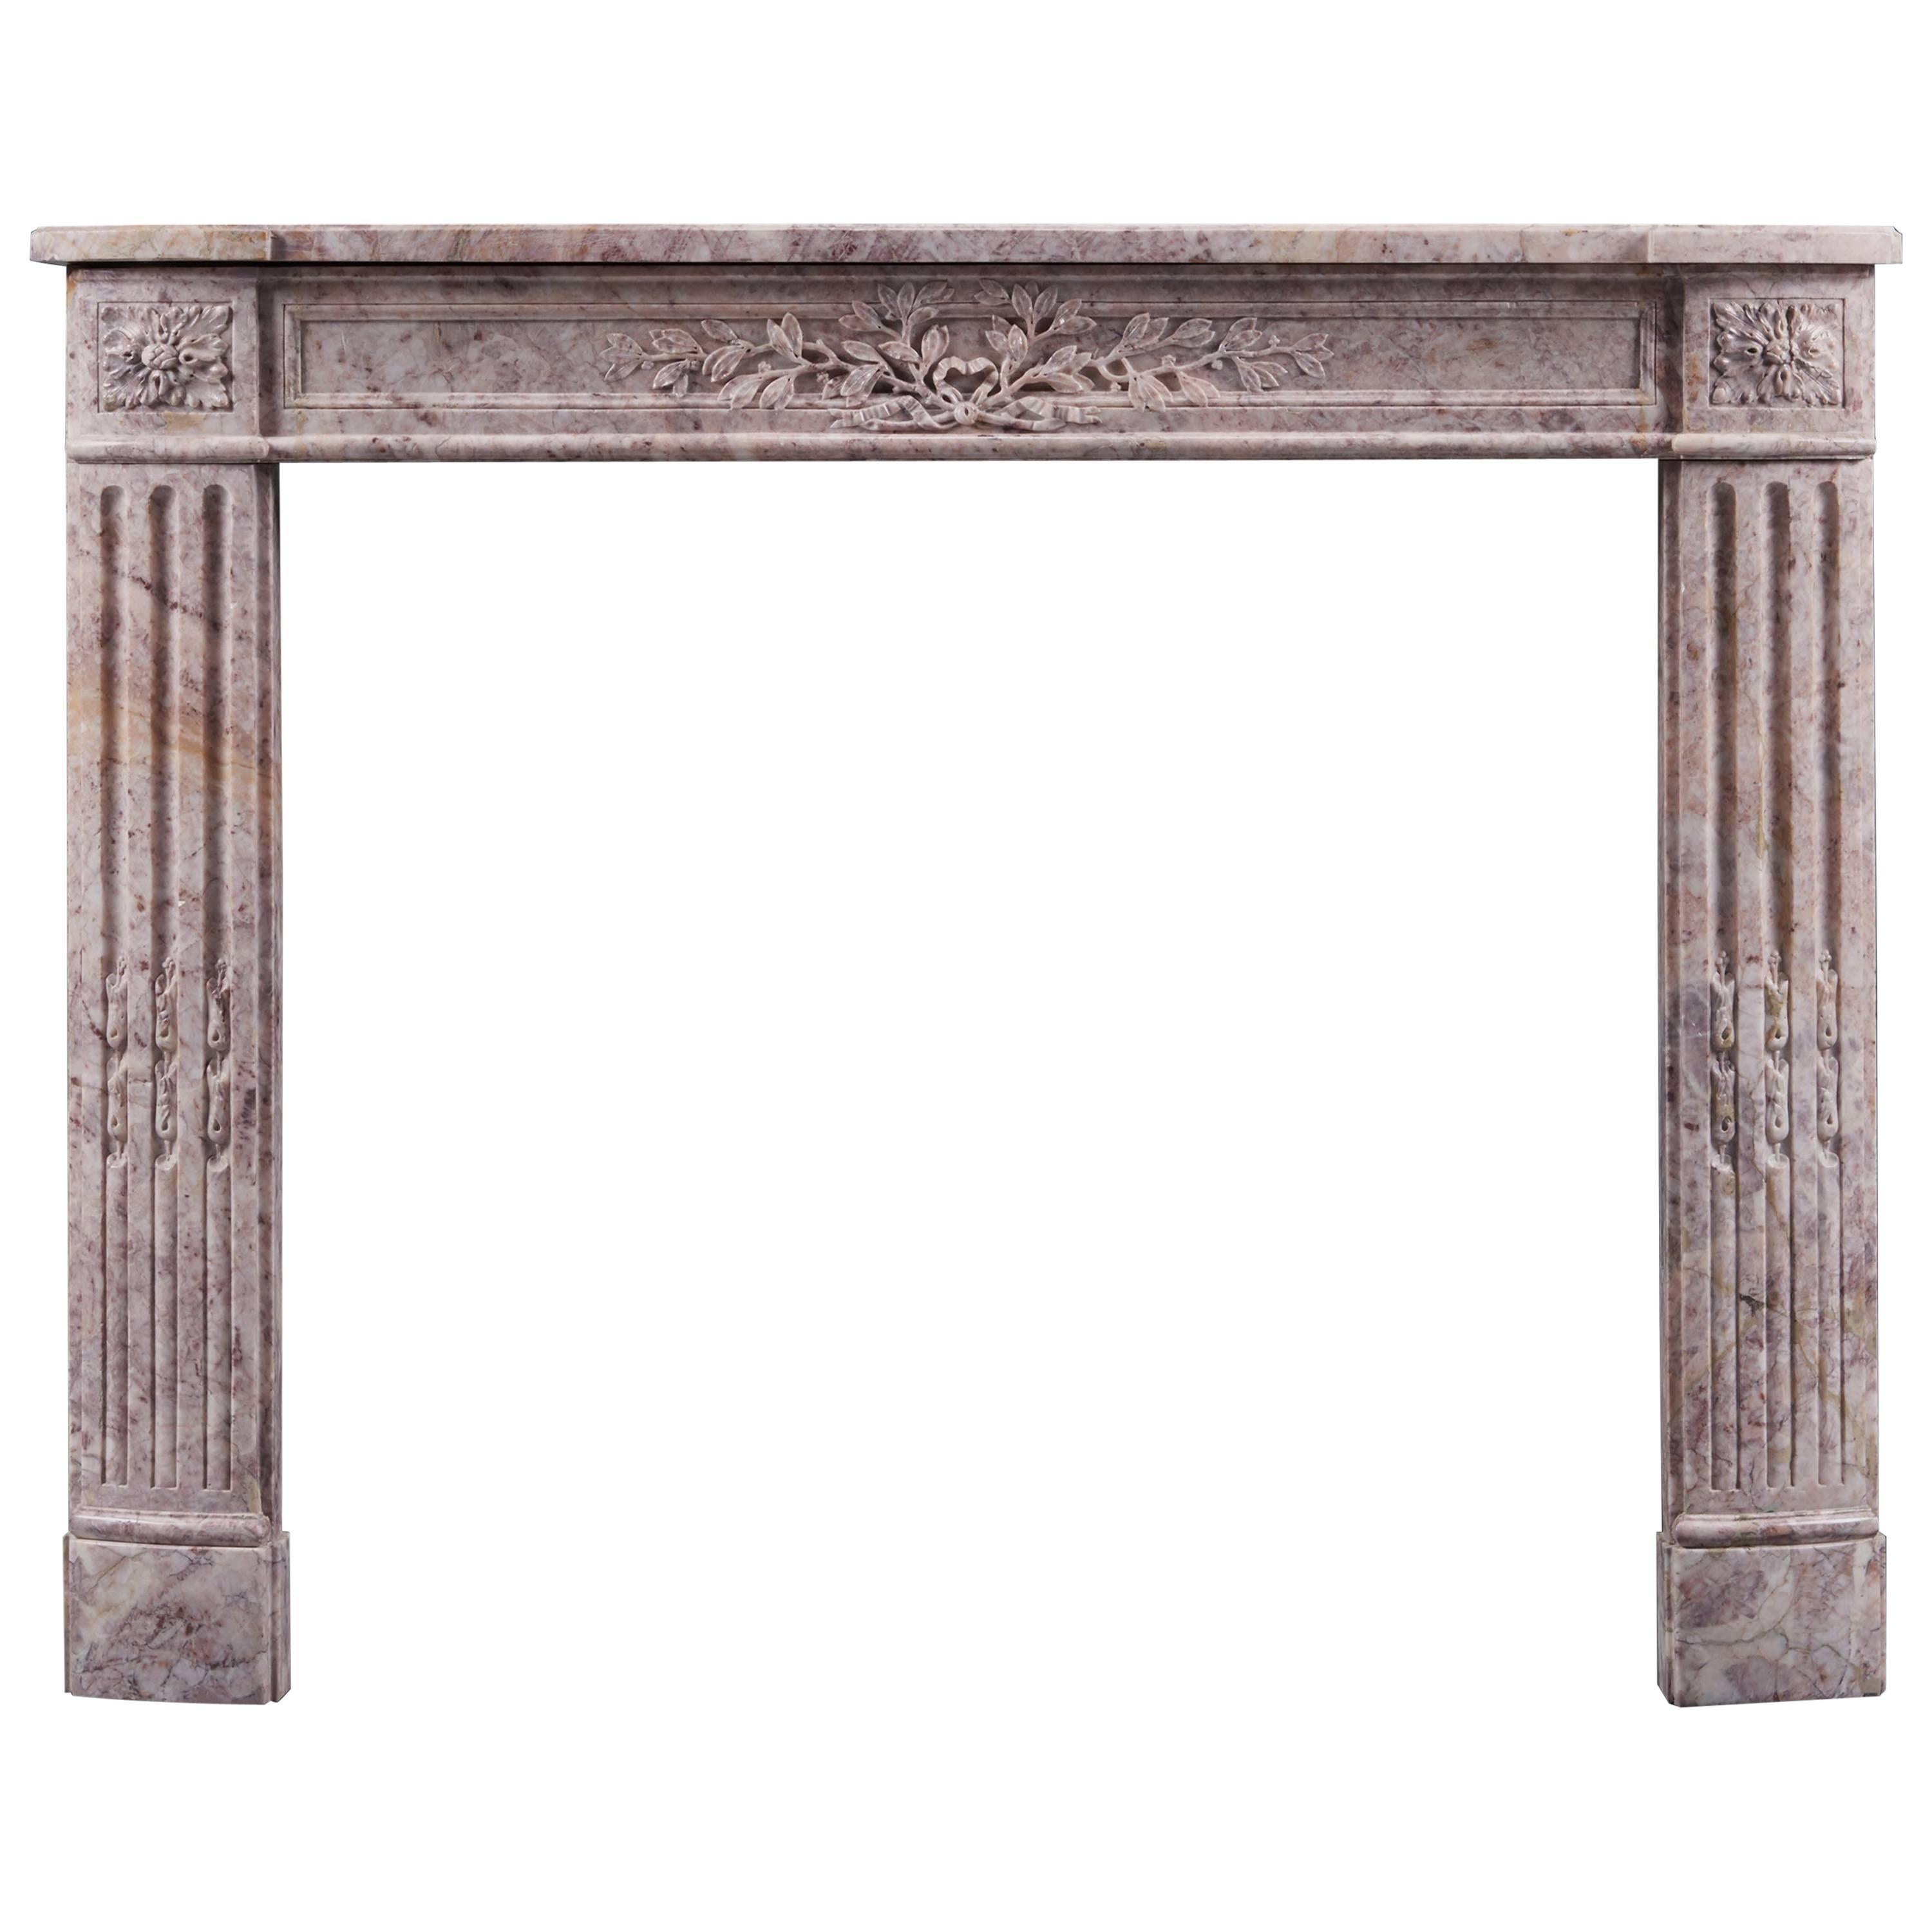 Antique 19th Century Louis XVI Style Rosso Antico Marble Fireplace